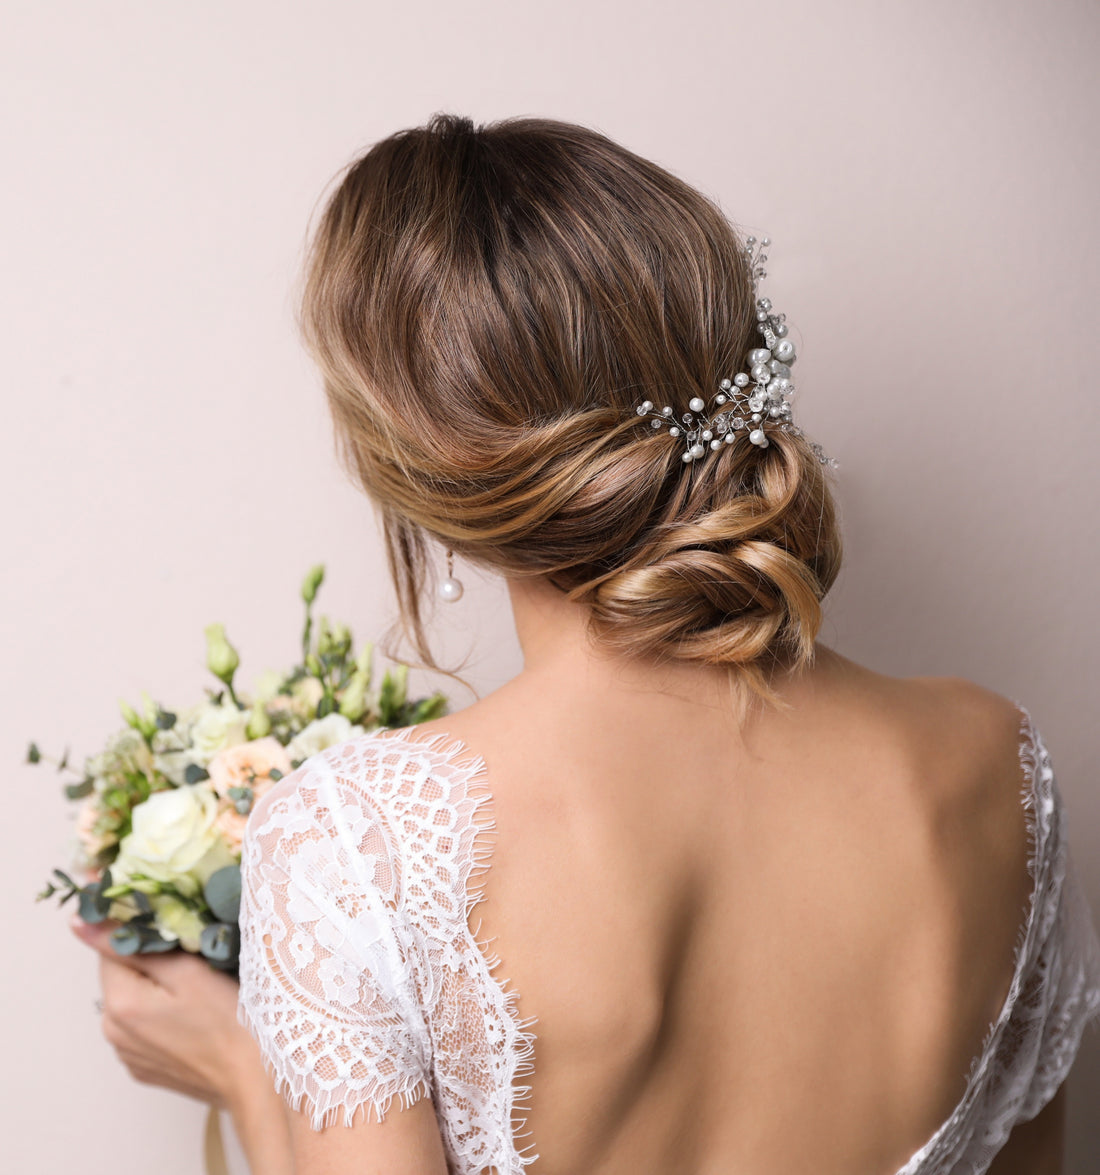 How to Choose Your Wedding Hairstyle?